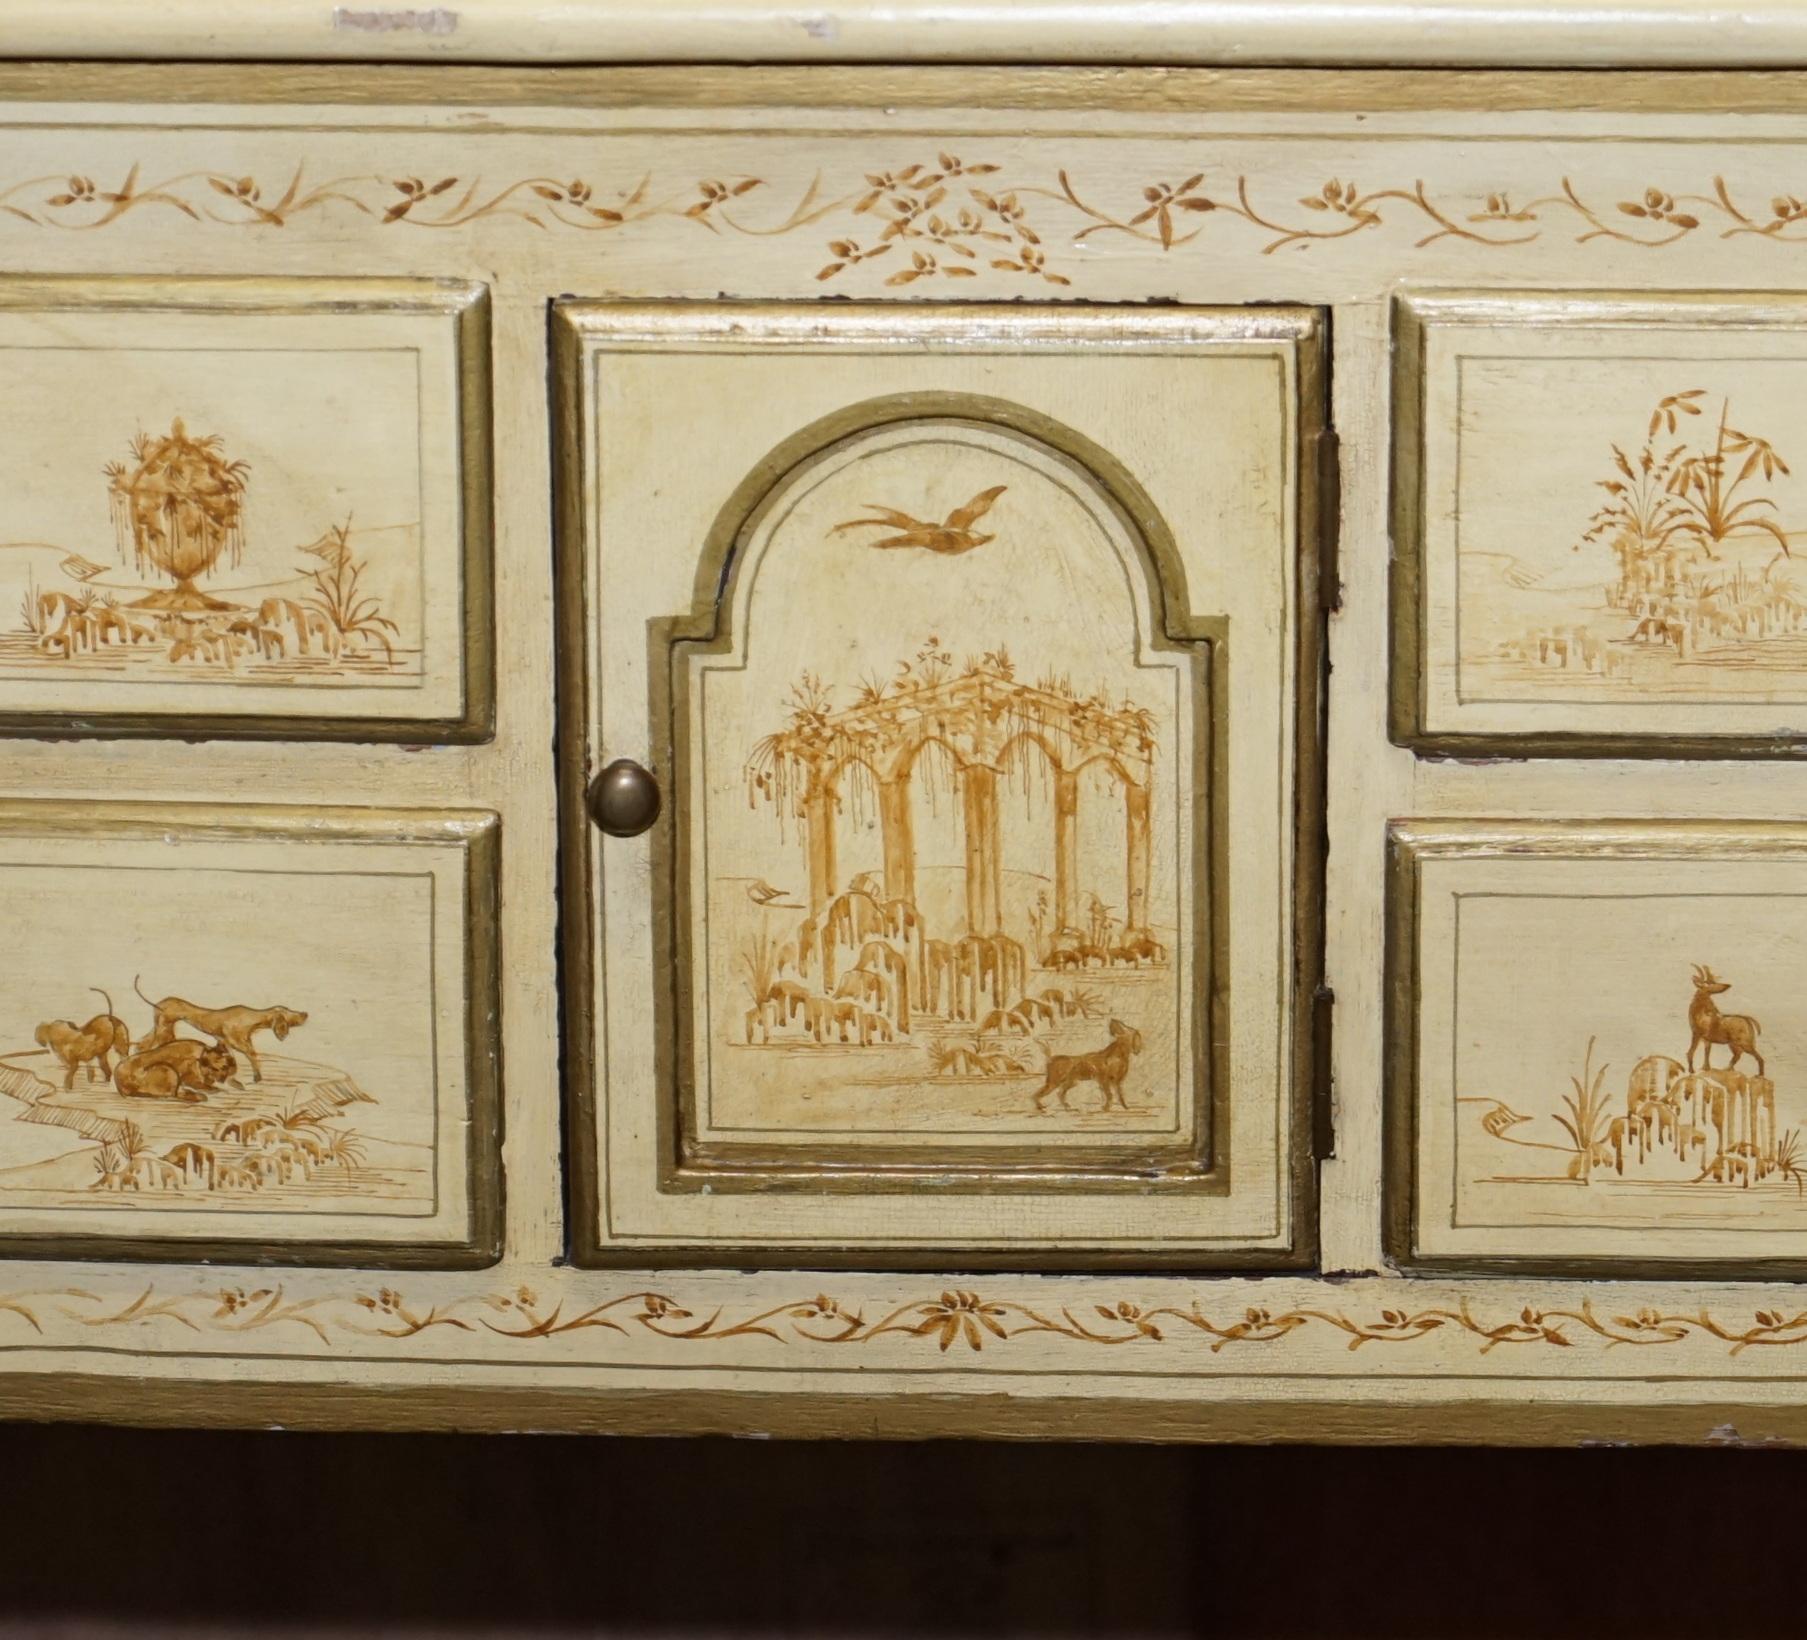 20th Century Stunning Chinoiserie Marble Topped Sideboard in the Chinese Chippendale Taste For Sale